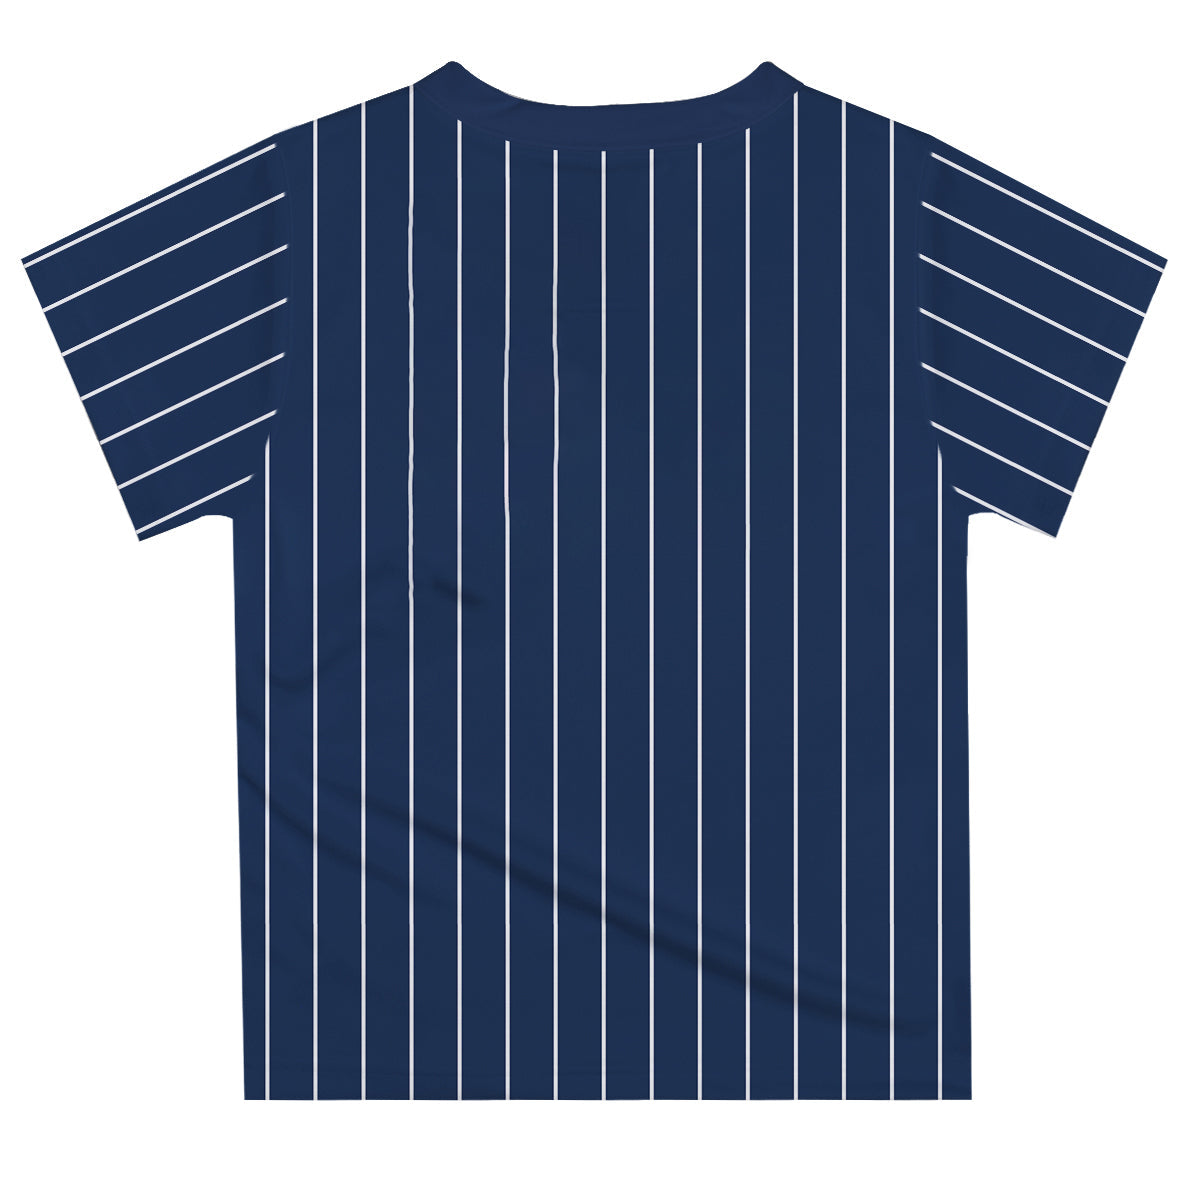 Baseball Personalized Name and Number Navy and White Stripes Short Sleeve Tee Shirt - Wimziy&Co.